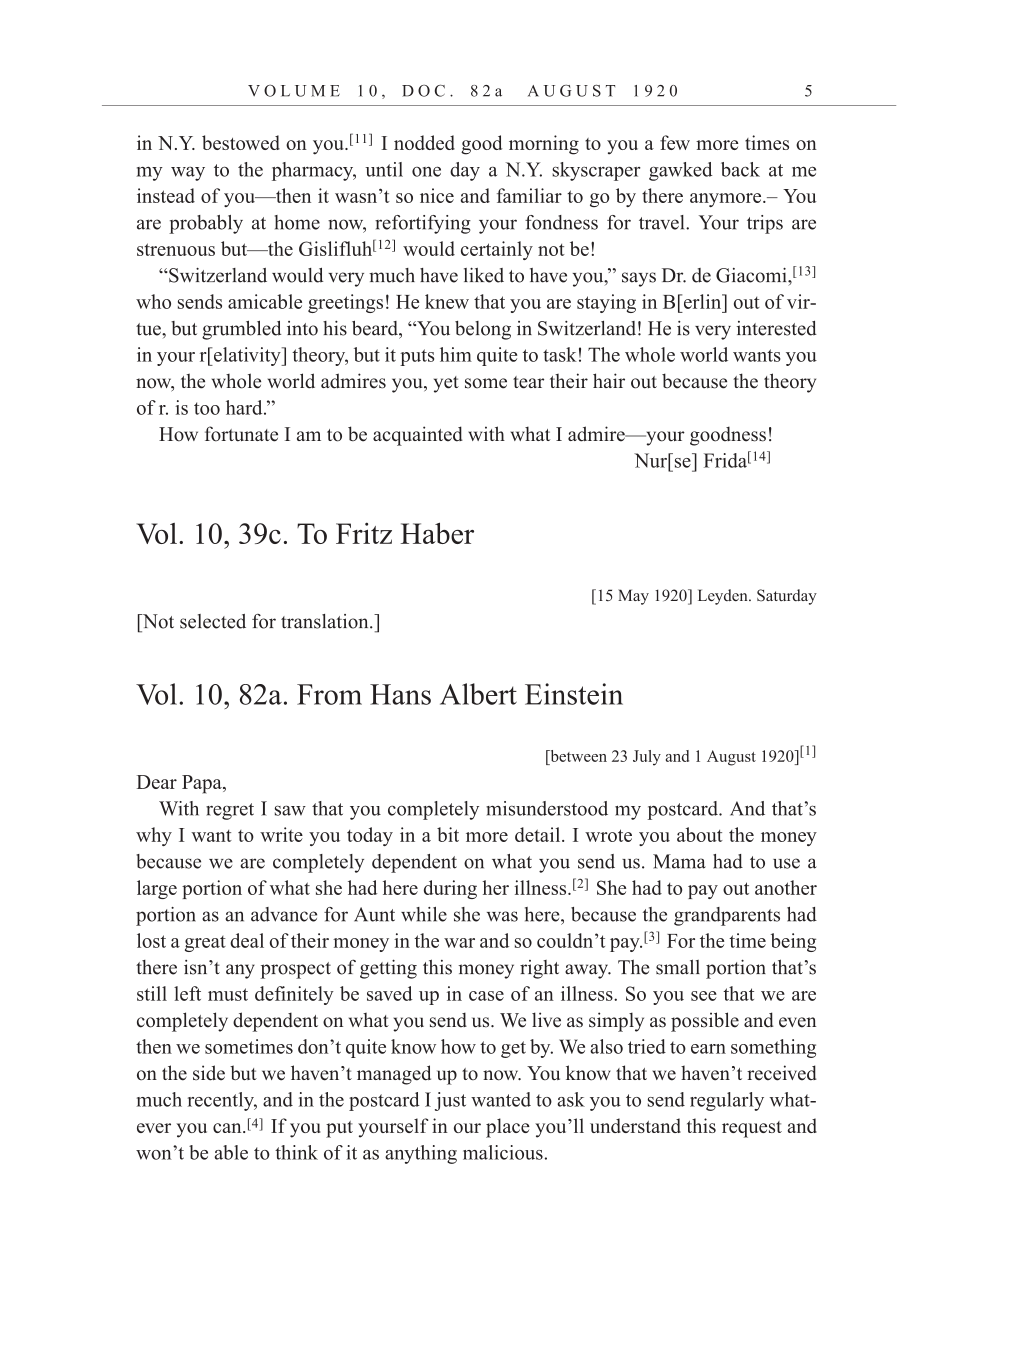 Volume 12: The Berlin Years: Correspondence, January-December 1921 (English translation supplement) page 5